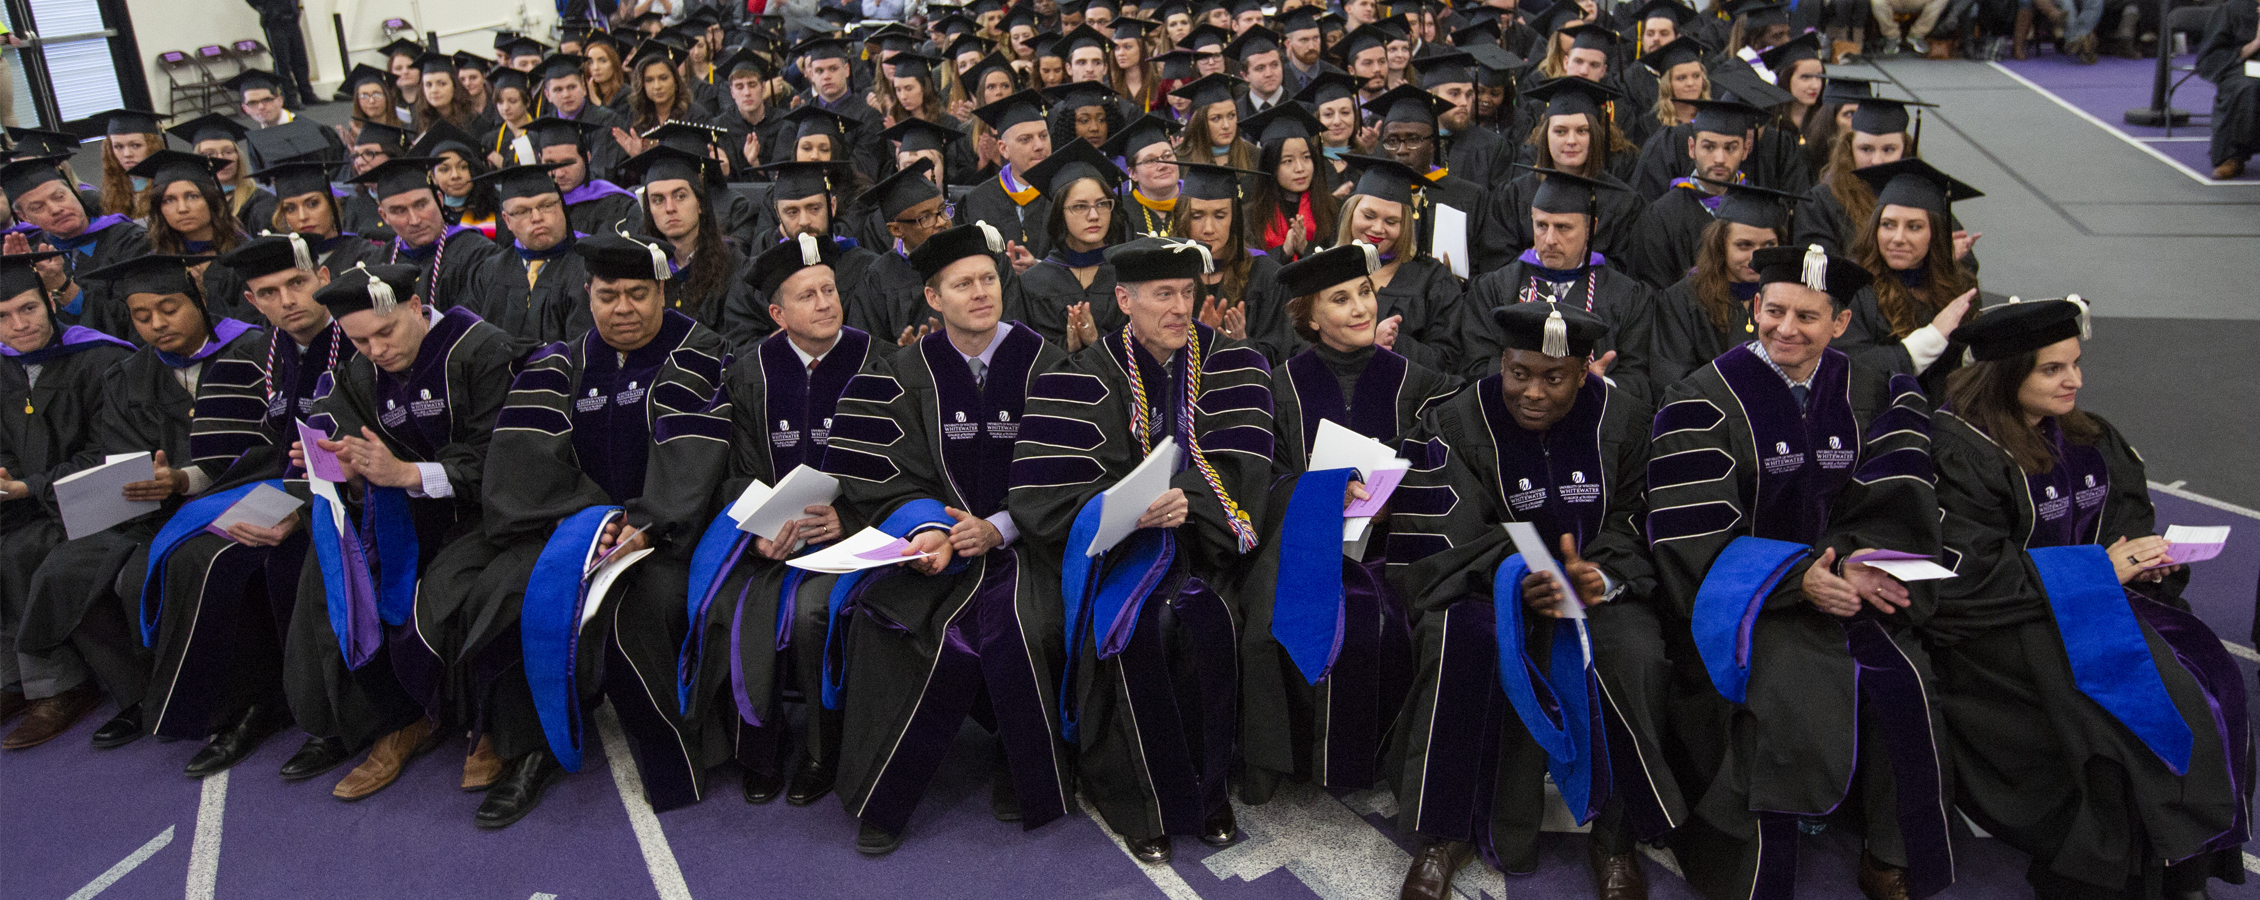 Members of the first cohort of Doctor of Business Administration graduates at UW-Whitewater sit in the front row at commencement.